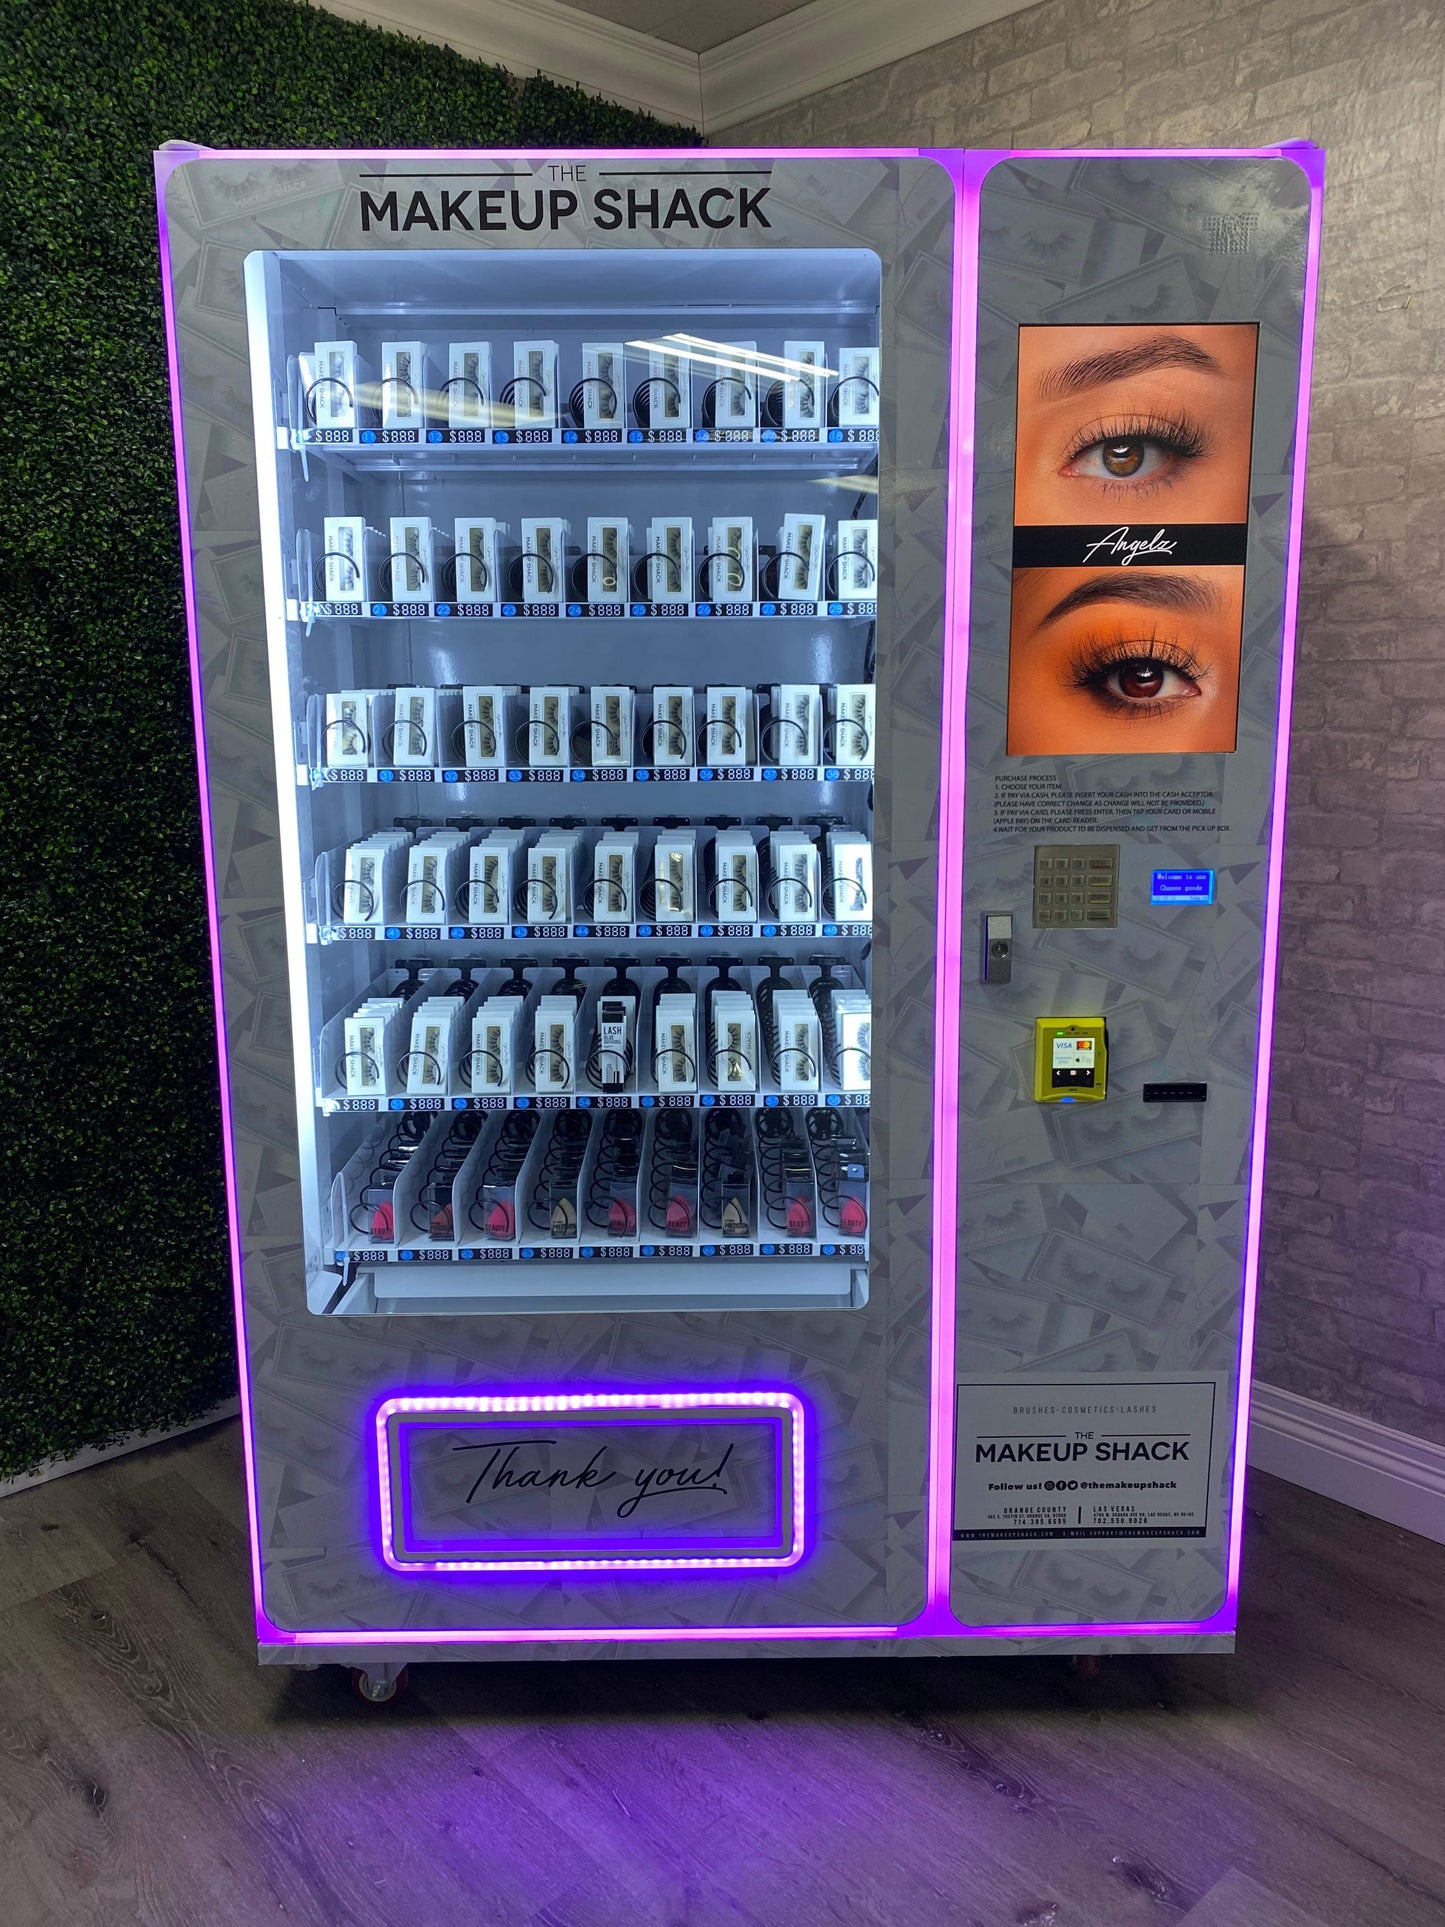 Made-in-USA Vending Machines for Sale